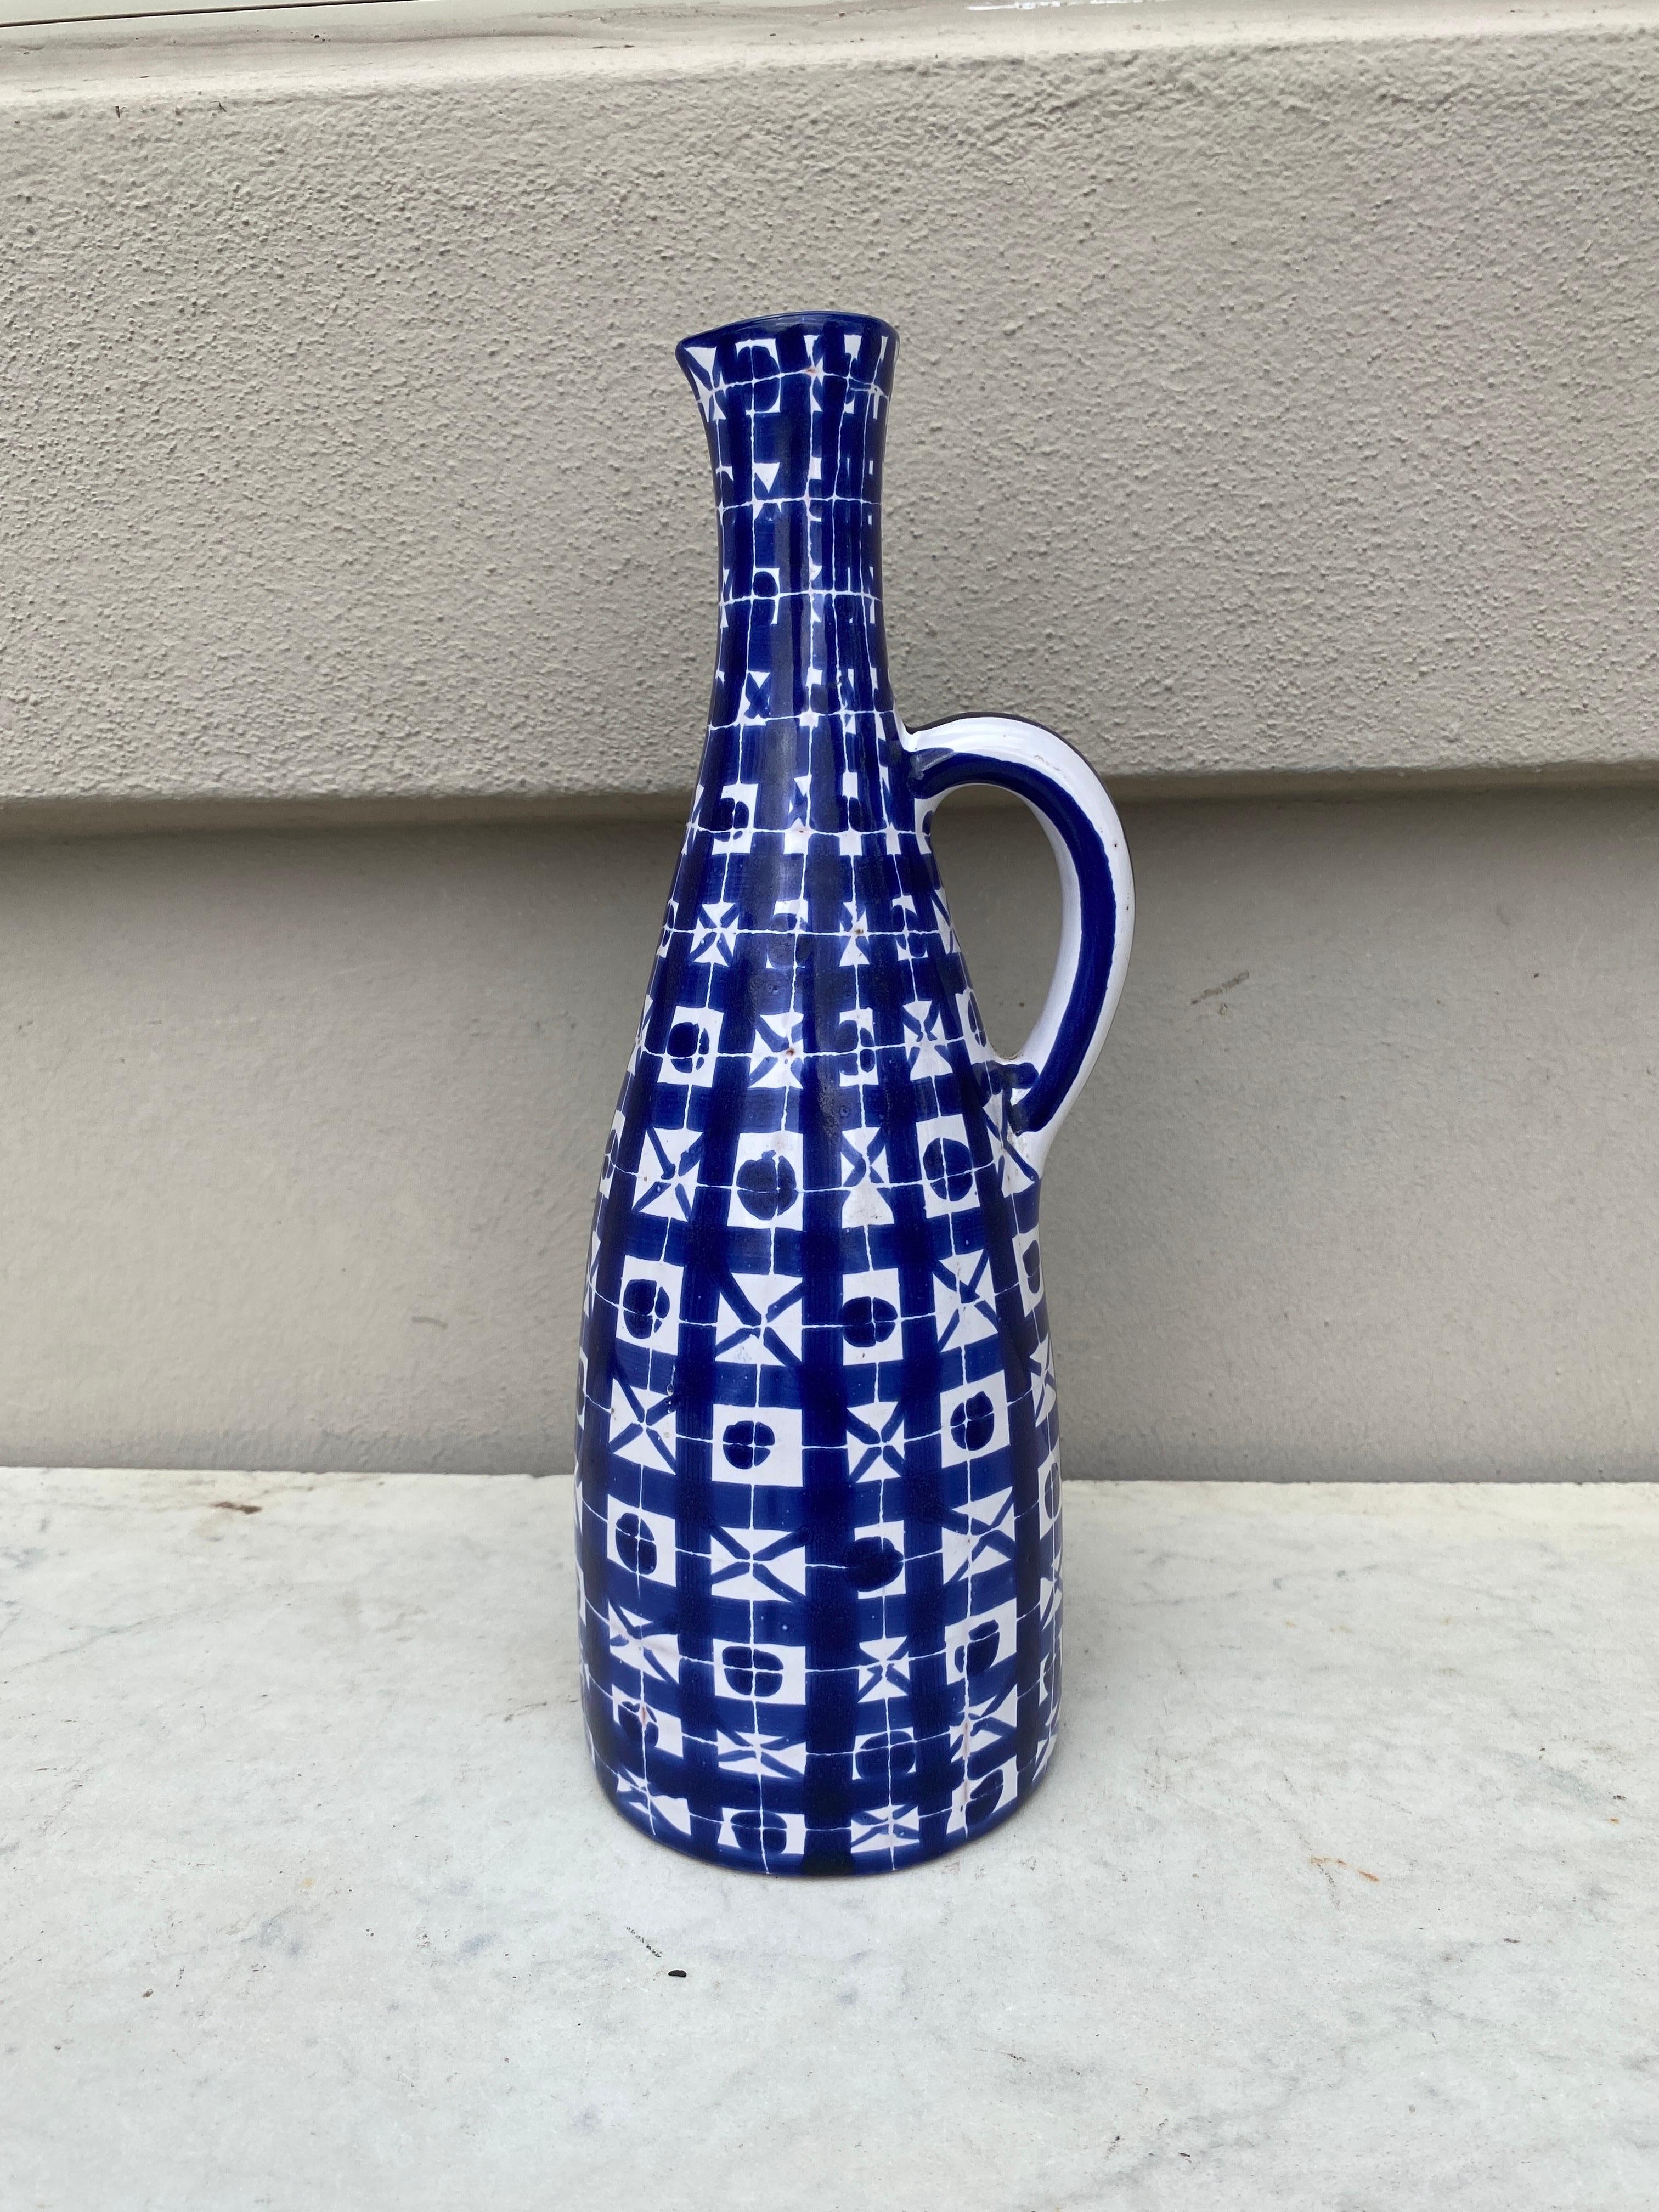 Blue & white Geometrical Pitcher or Bottle signed Robert Picault circa 1950.
Robert Picault (1919 - 2000) was born in Vincennes, Paris and studied at the School of Applied Arts in Paris. After the war he spent a short time teaching drawing and in